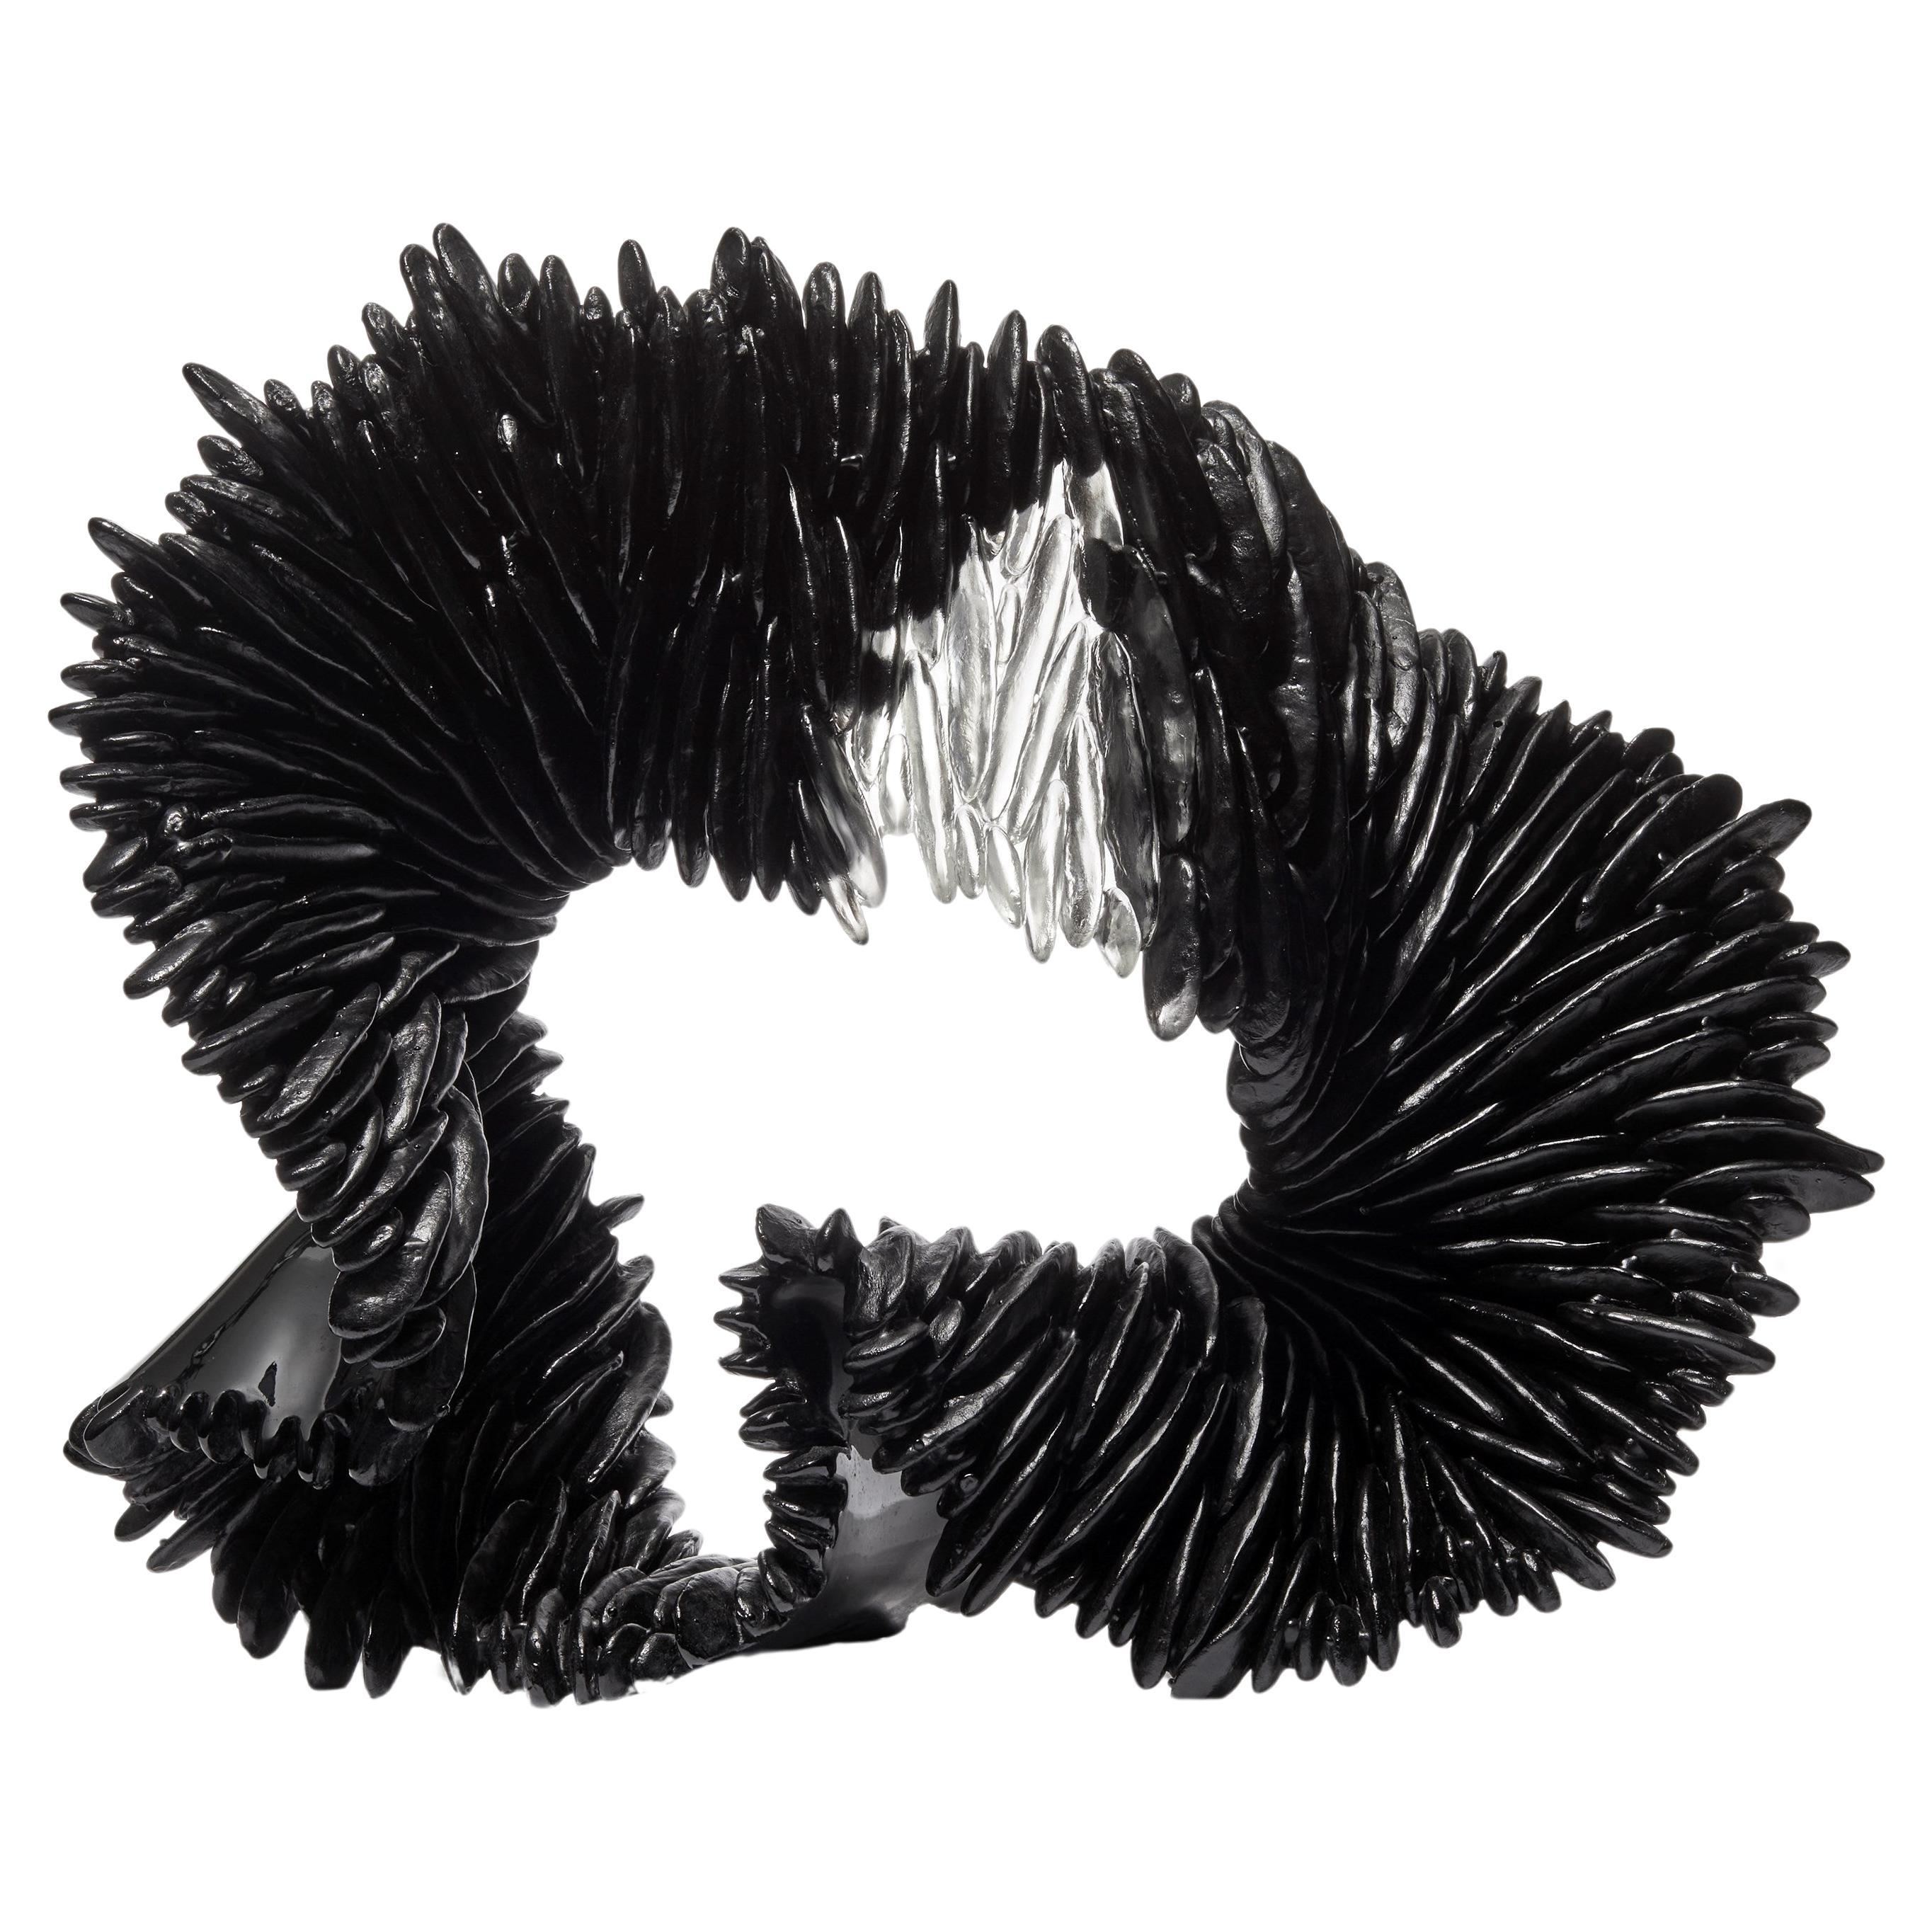  Black Lamellae, standing textured cast glass sculpture by Nina Casson McGarva For Sale